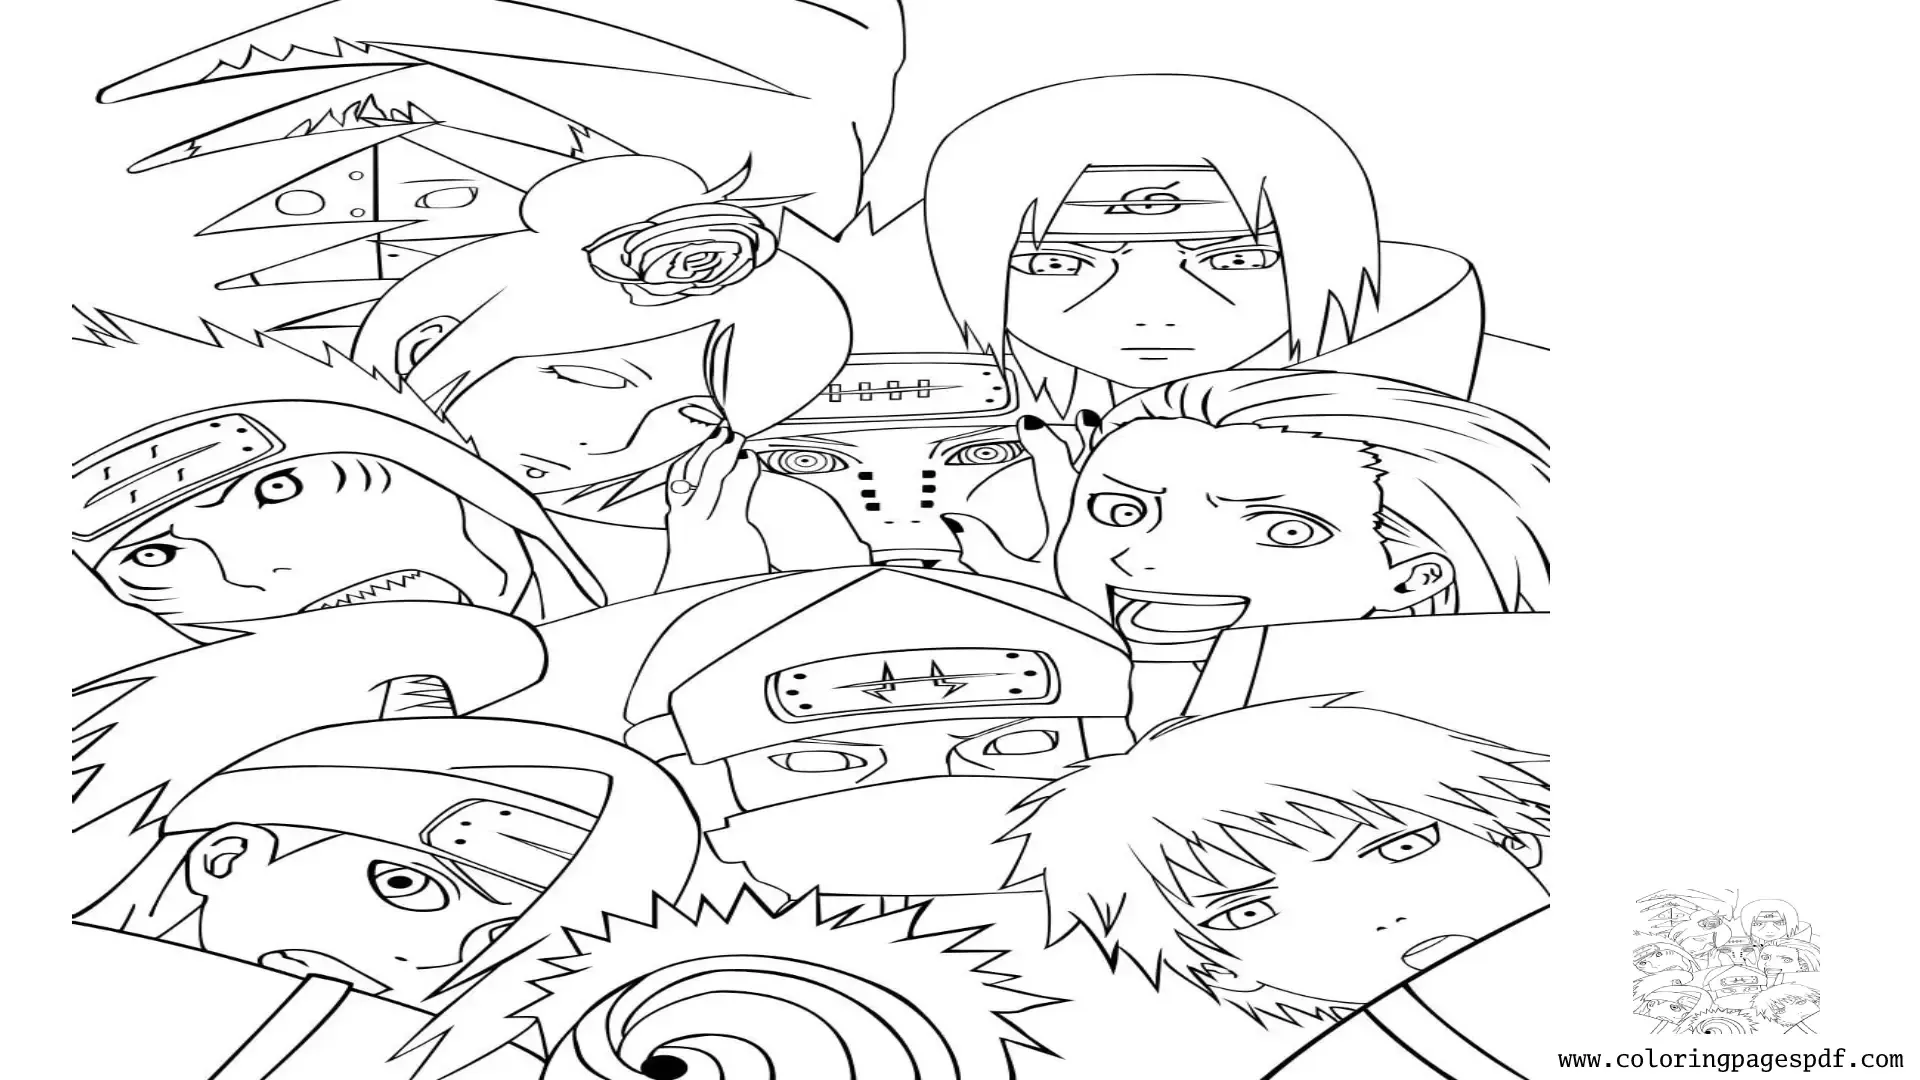 Coloring Pages Of Akatsuki Members Taking A Picture